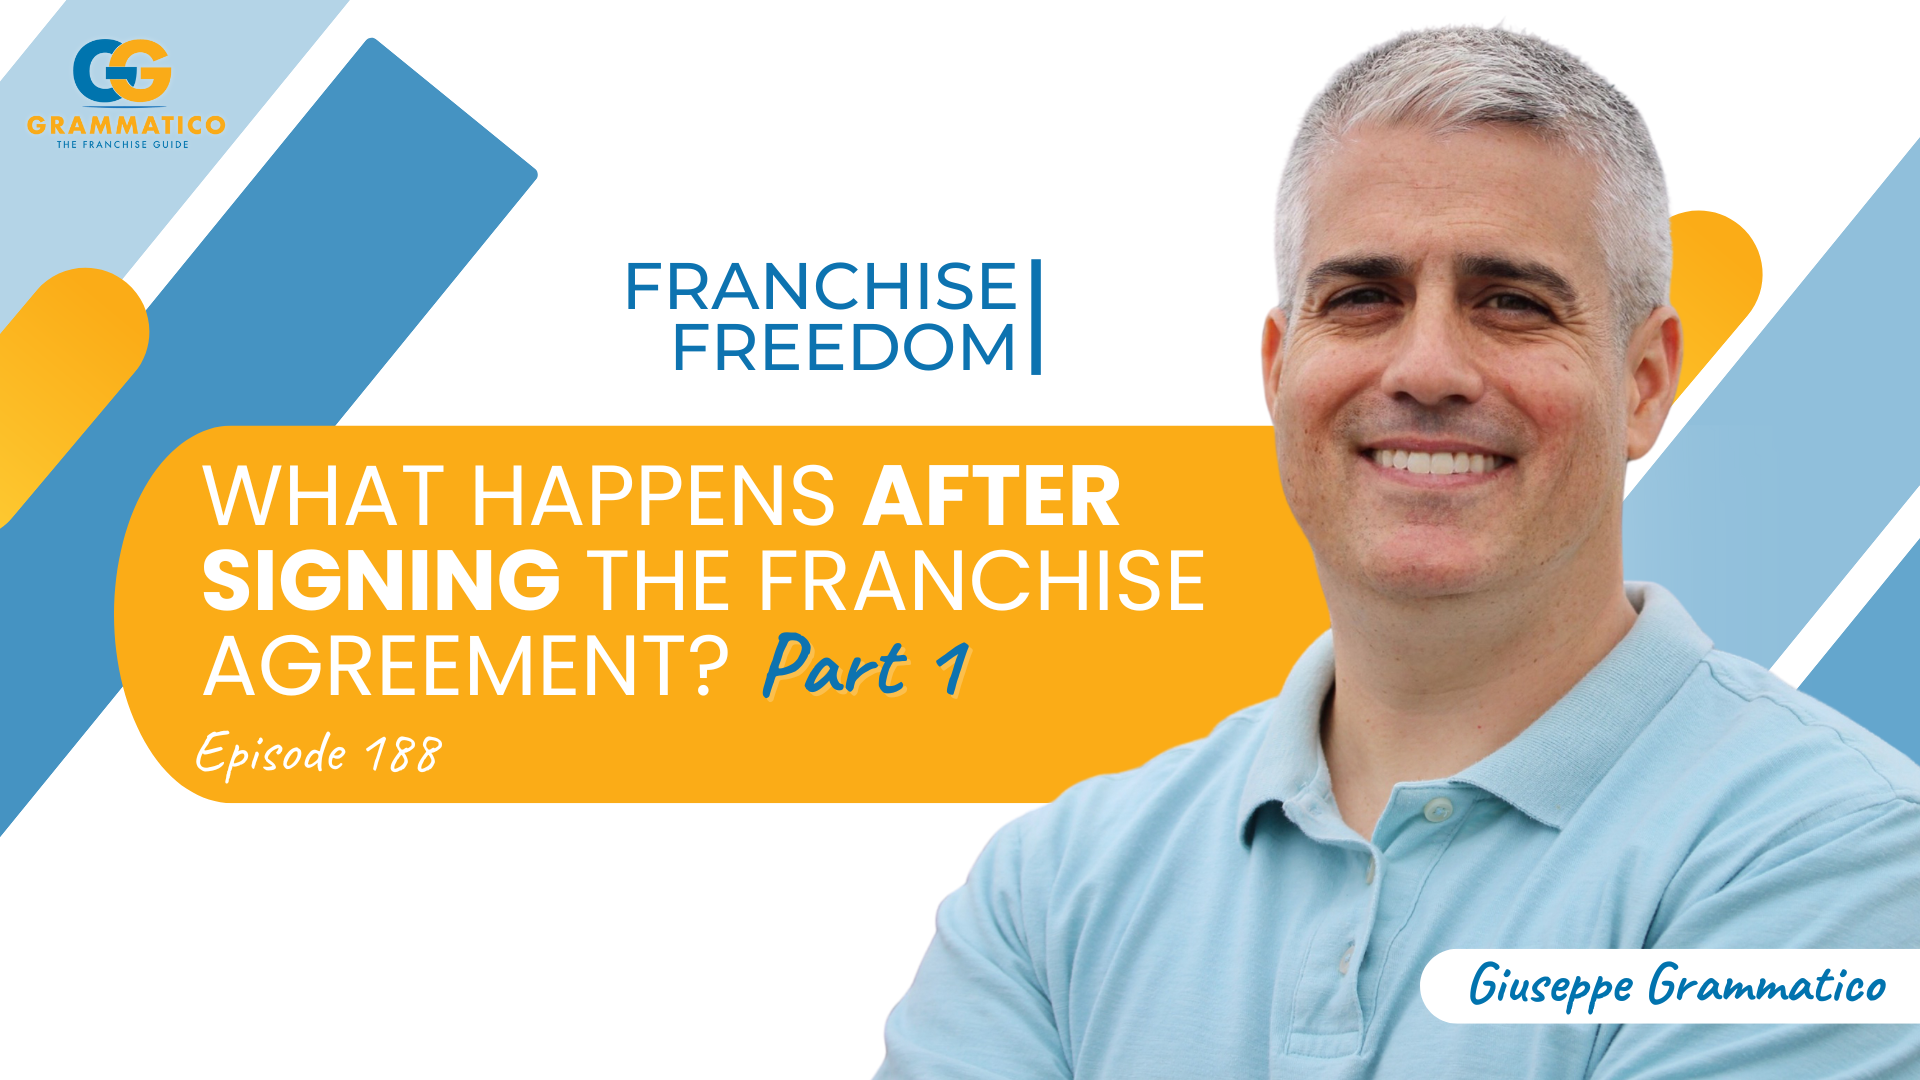 What Happens After Signing The Franchise Agreement? – Part 1 of 2